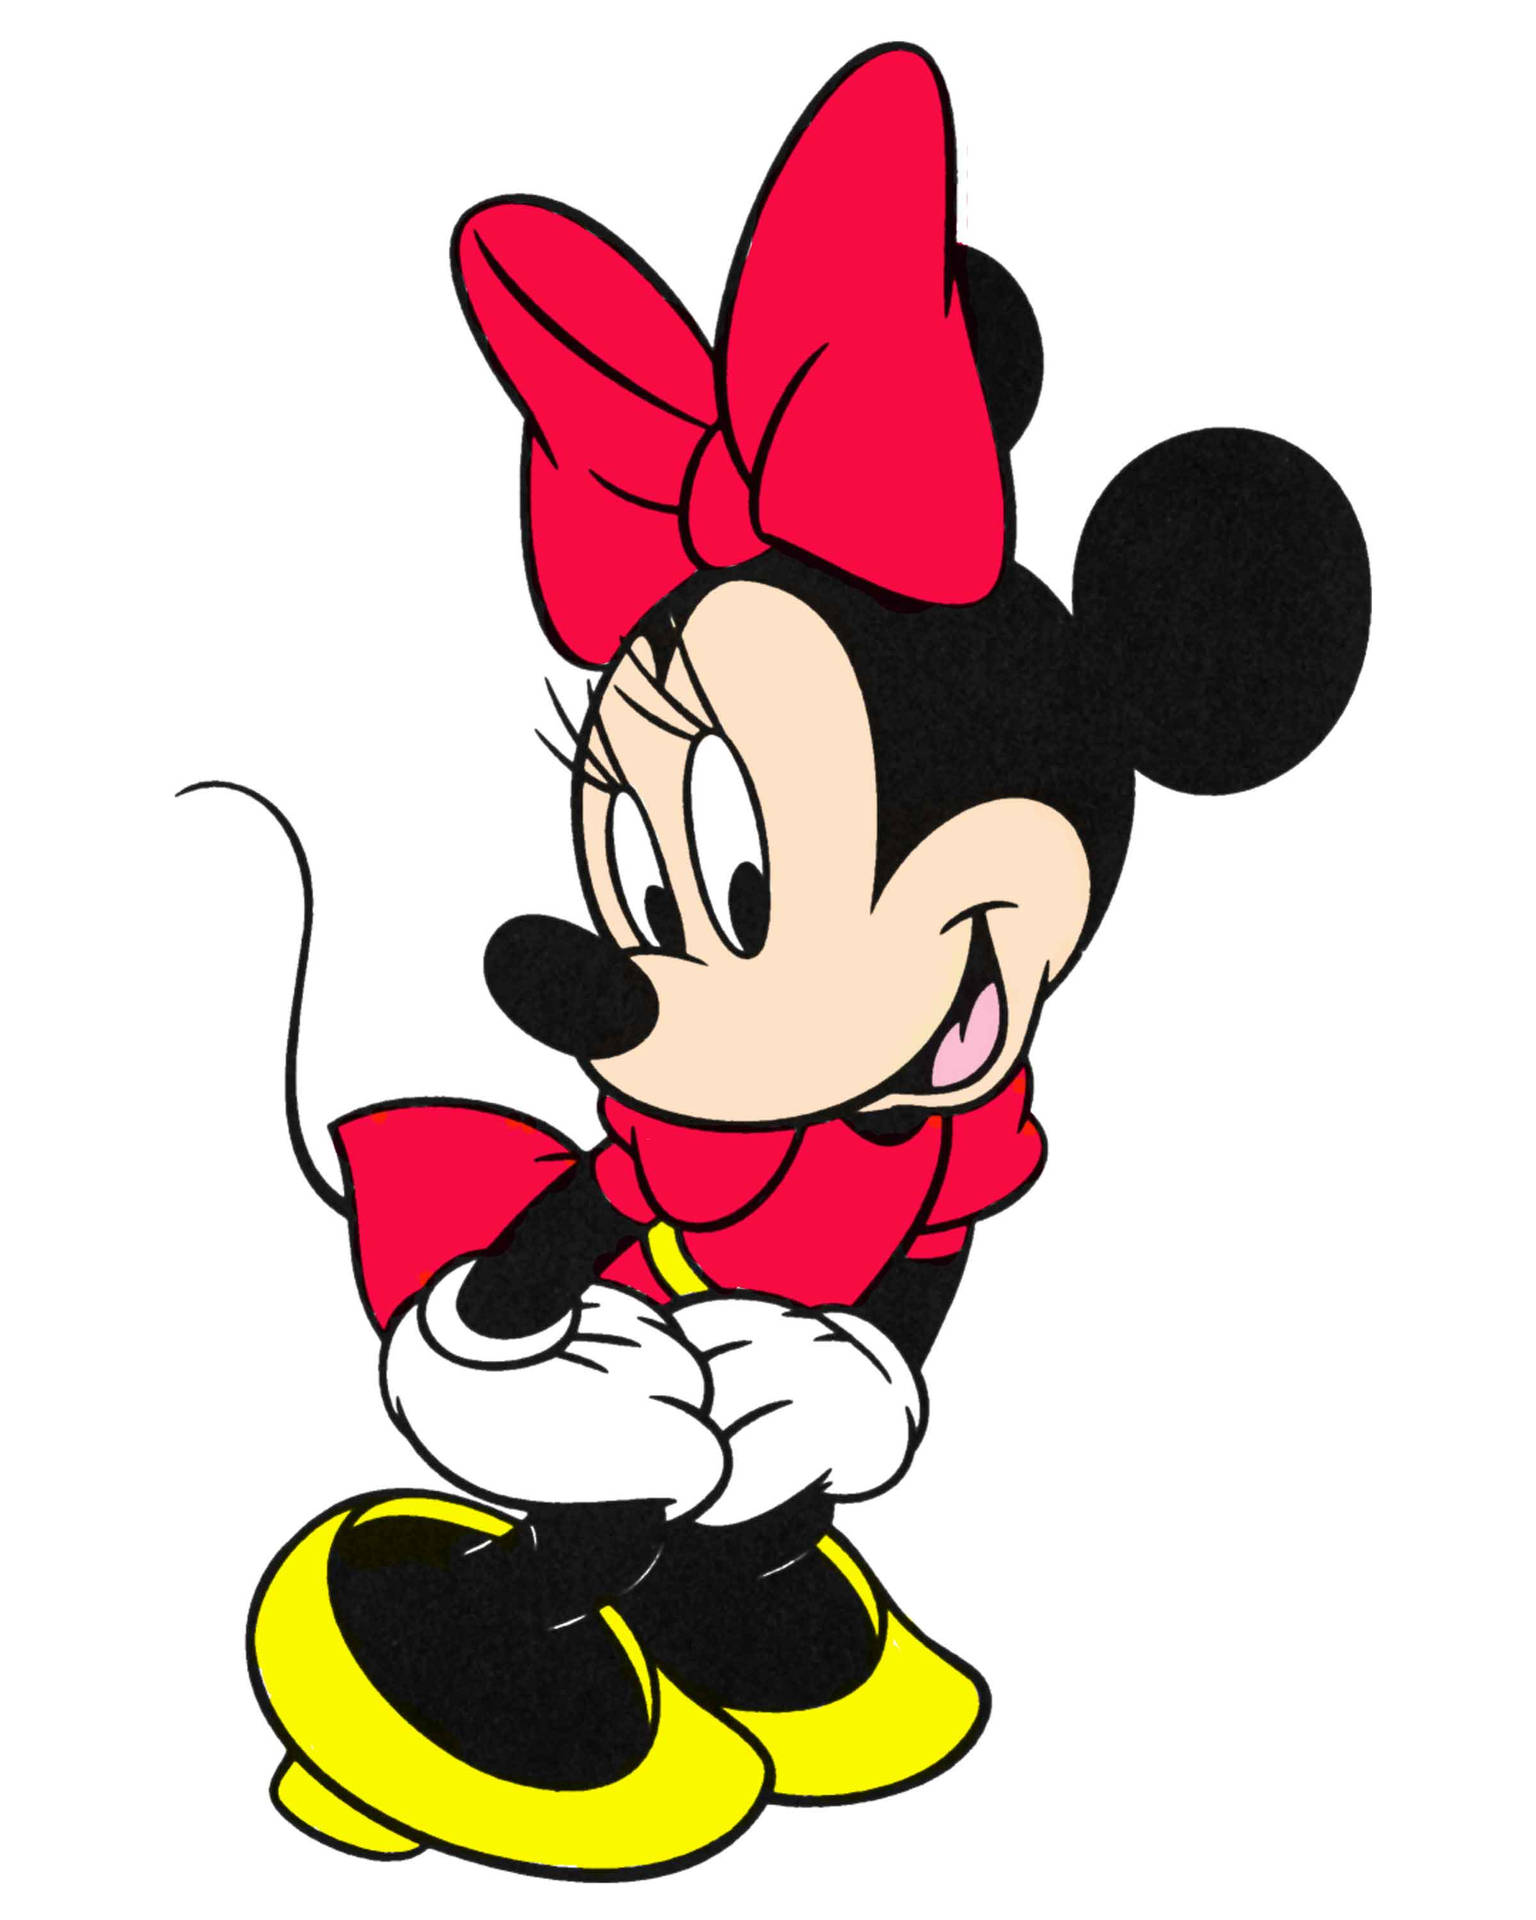 Minnie Mouse Posing Red Dress Background